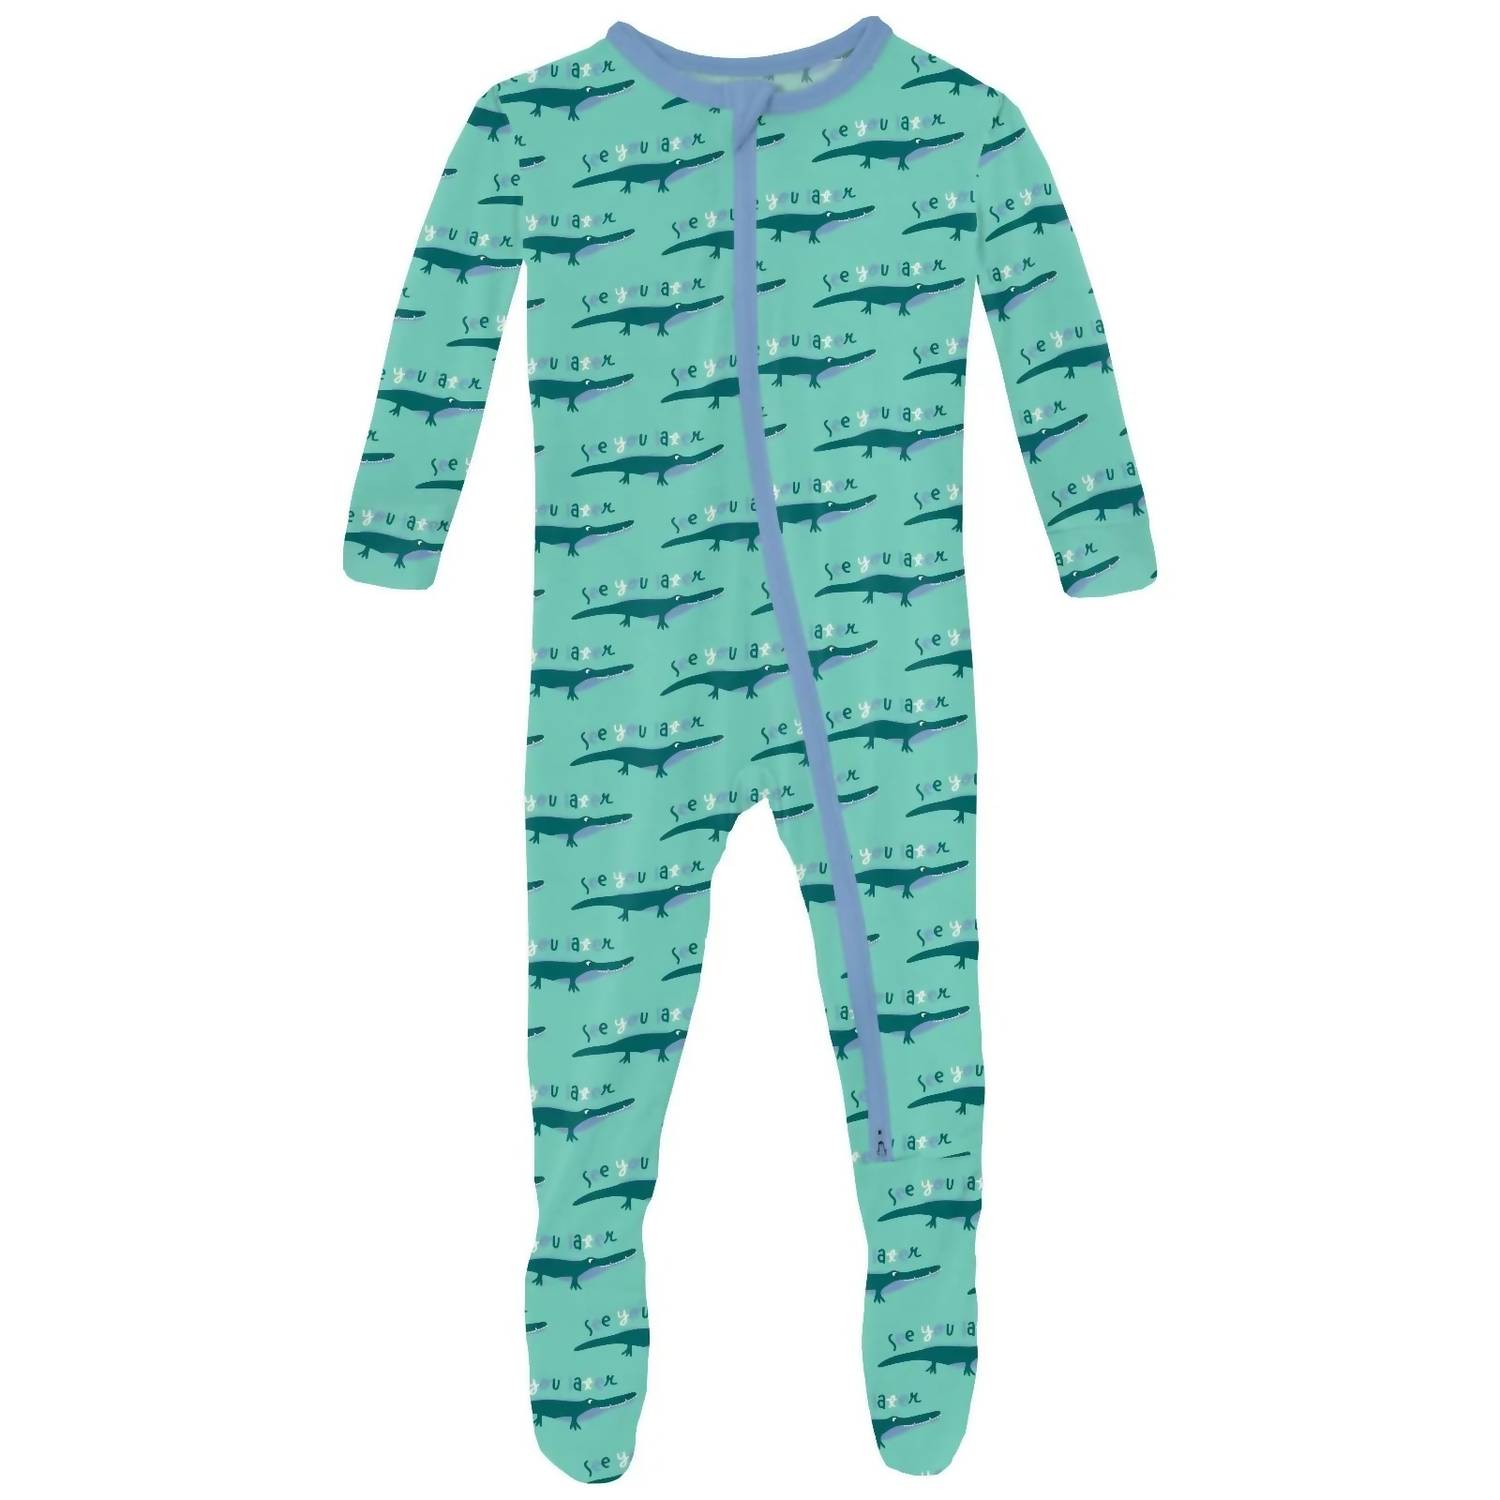 Kickee Baby Bamboo Print Footie In Glass Later Alligator